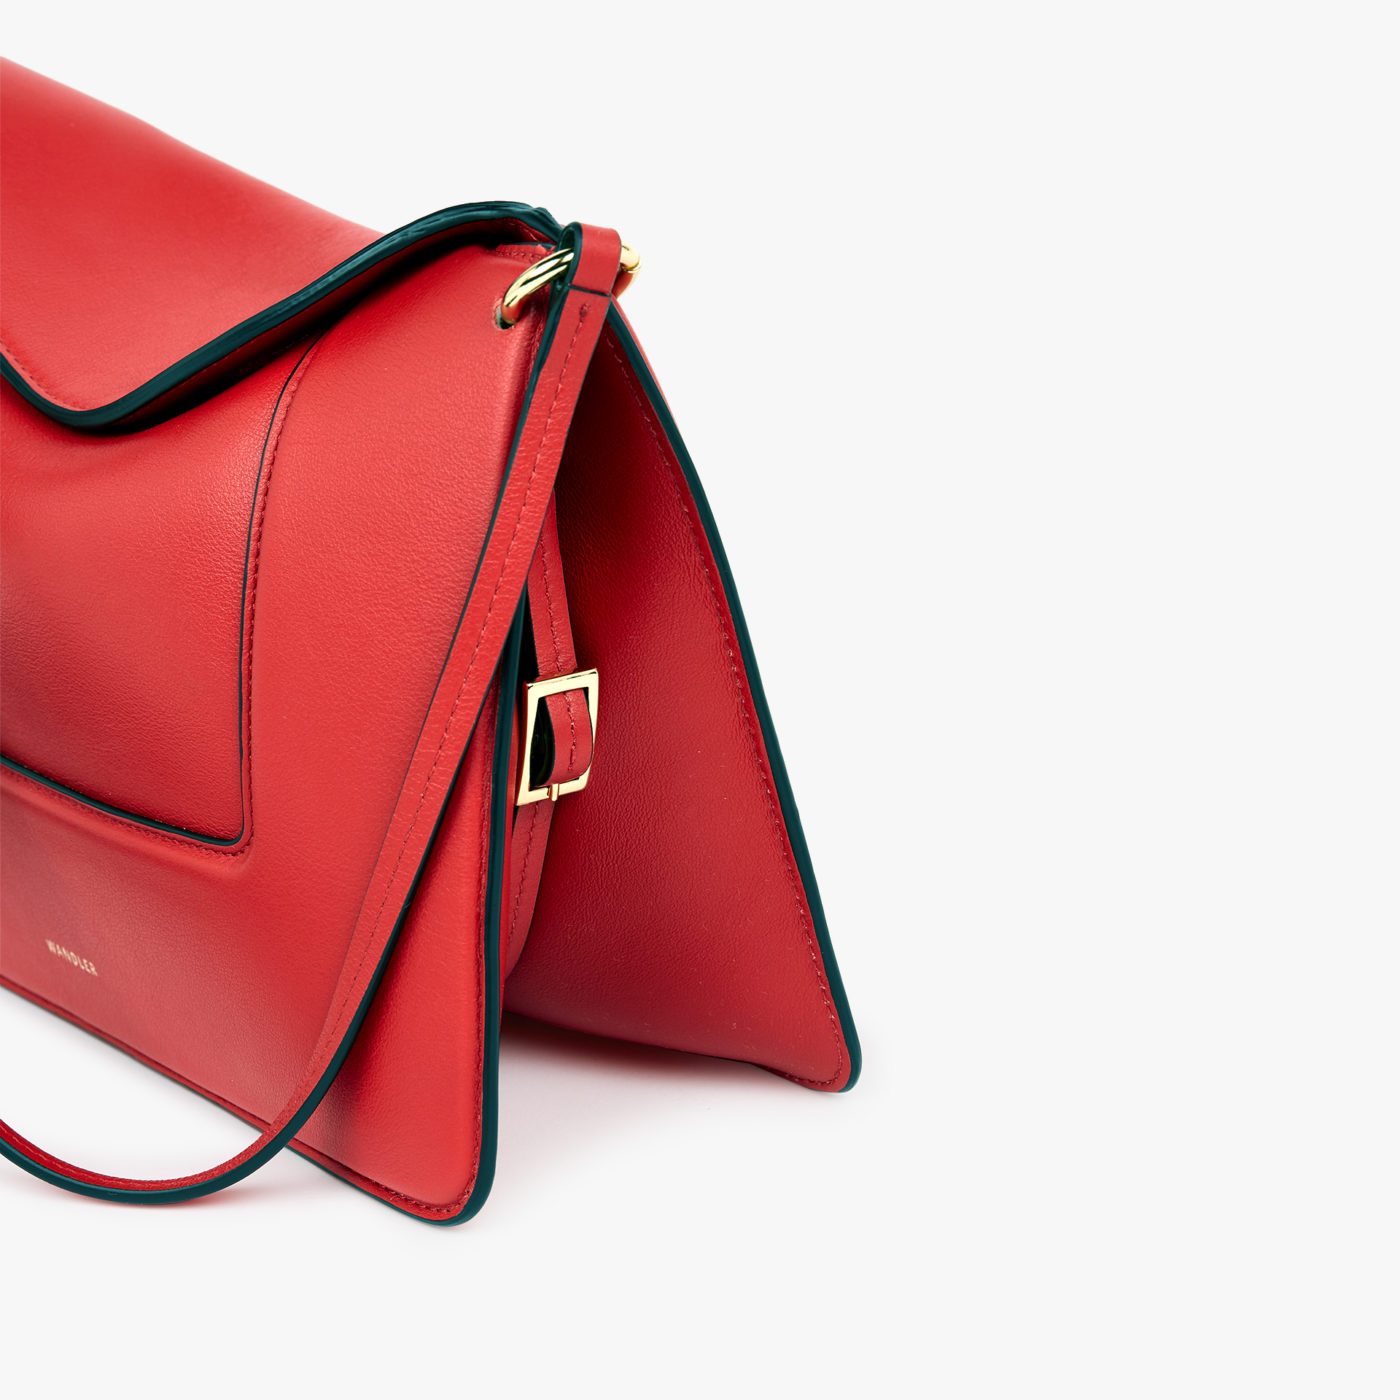 A packshot fashion image showcasing a red handbag with a dynamic angle, professionally captured by I Heart Studios.